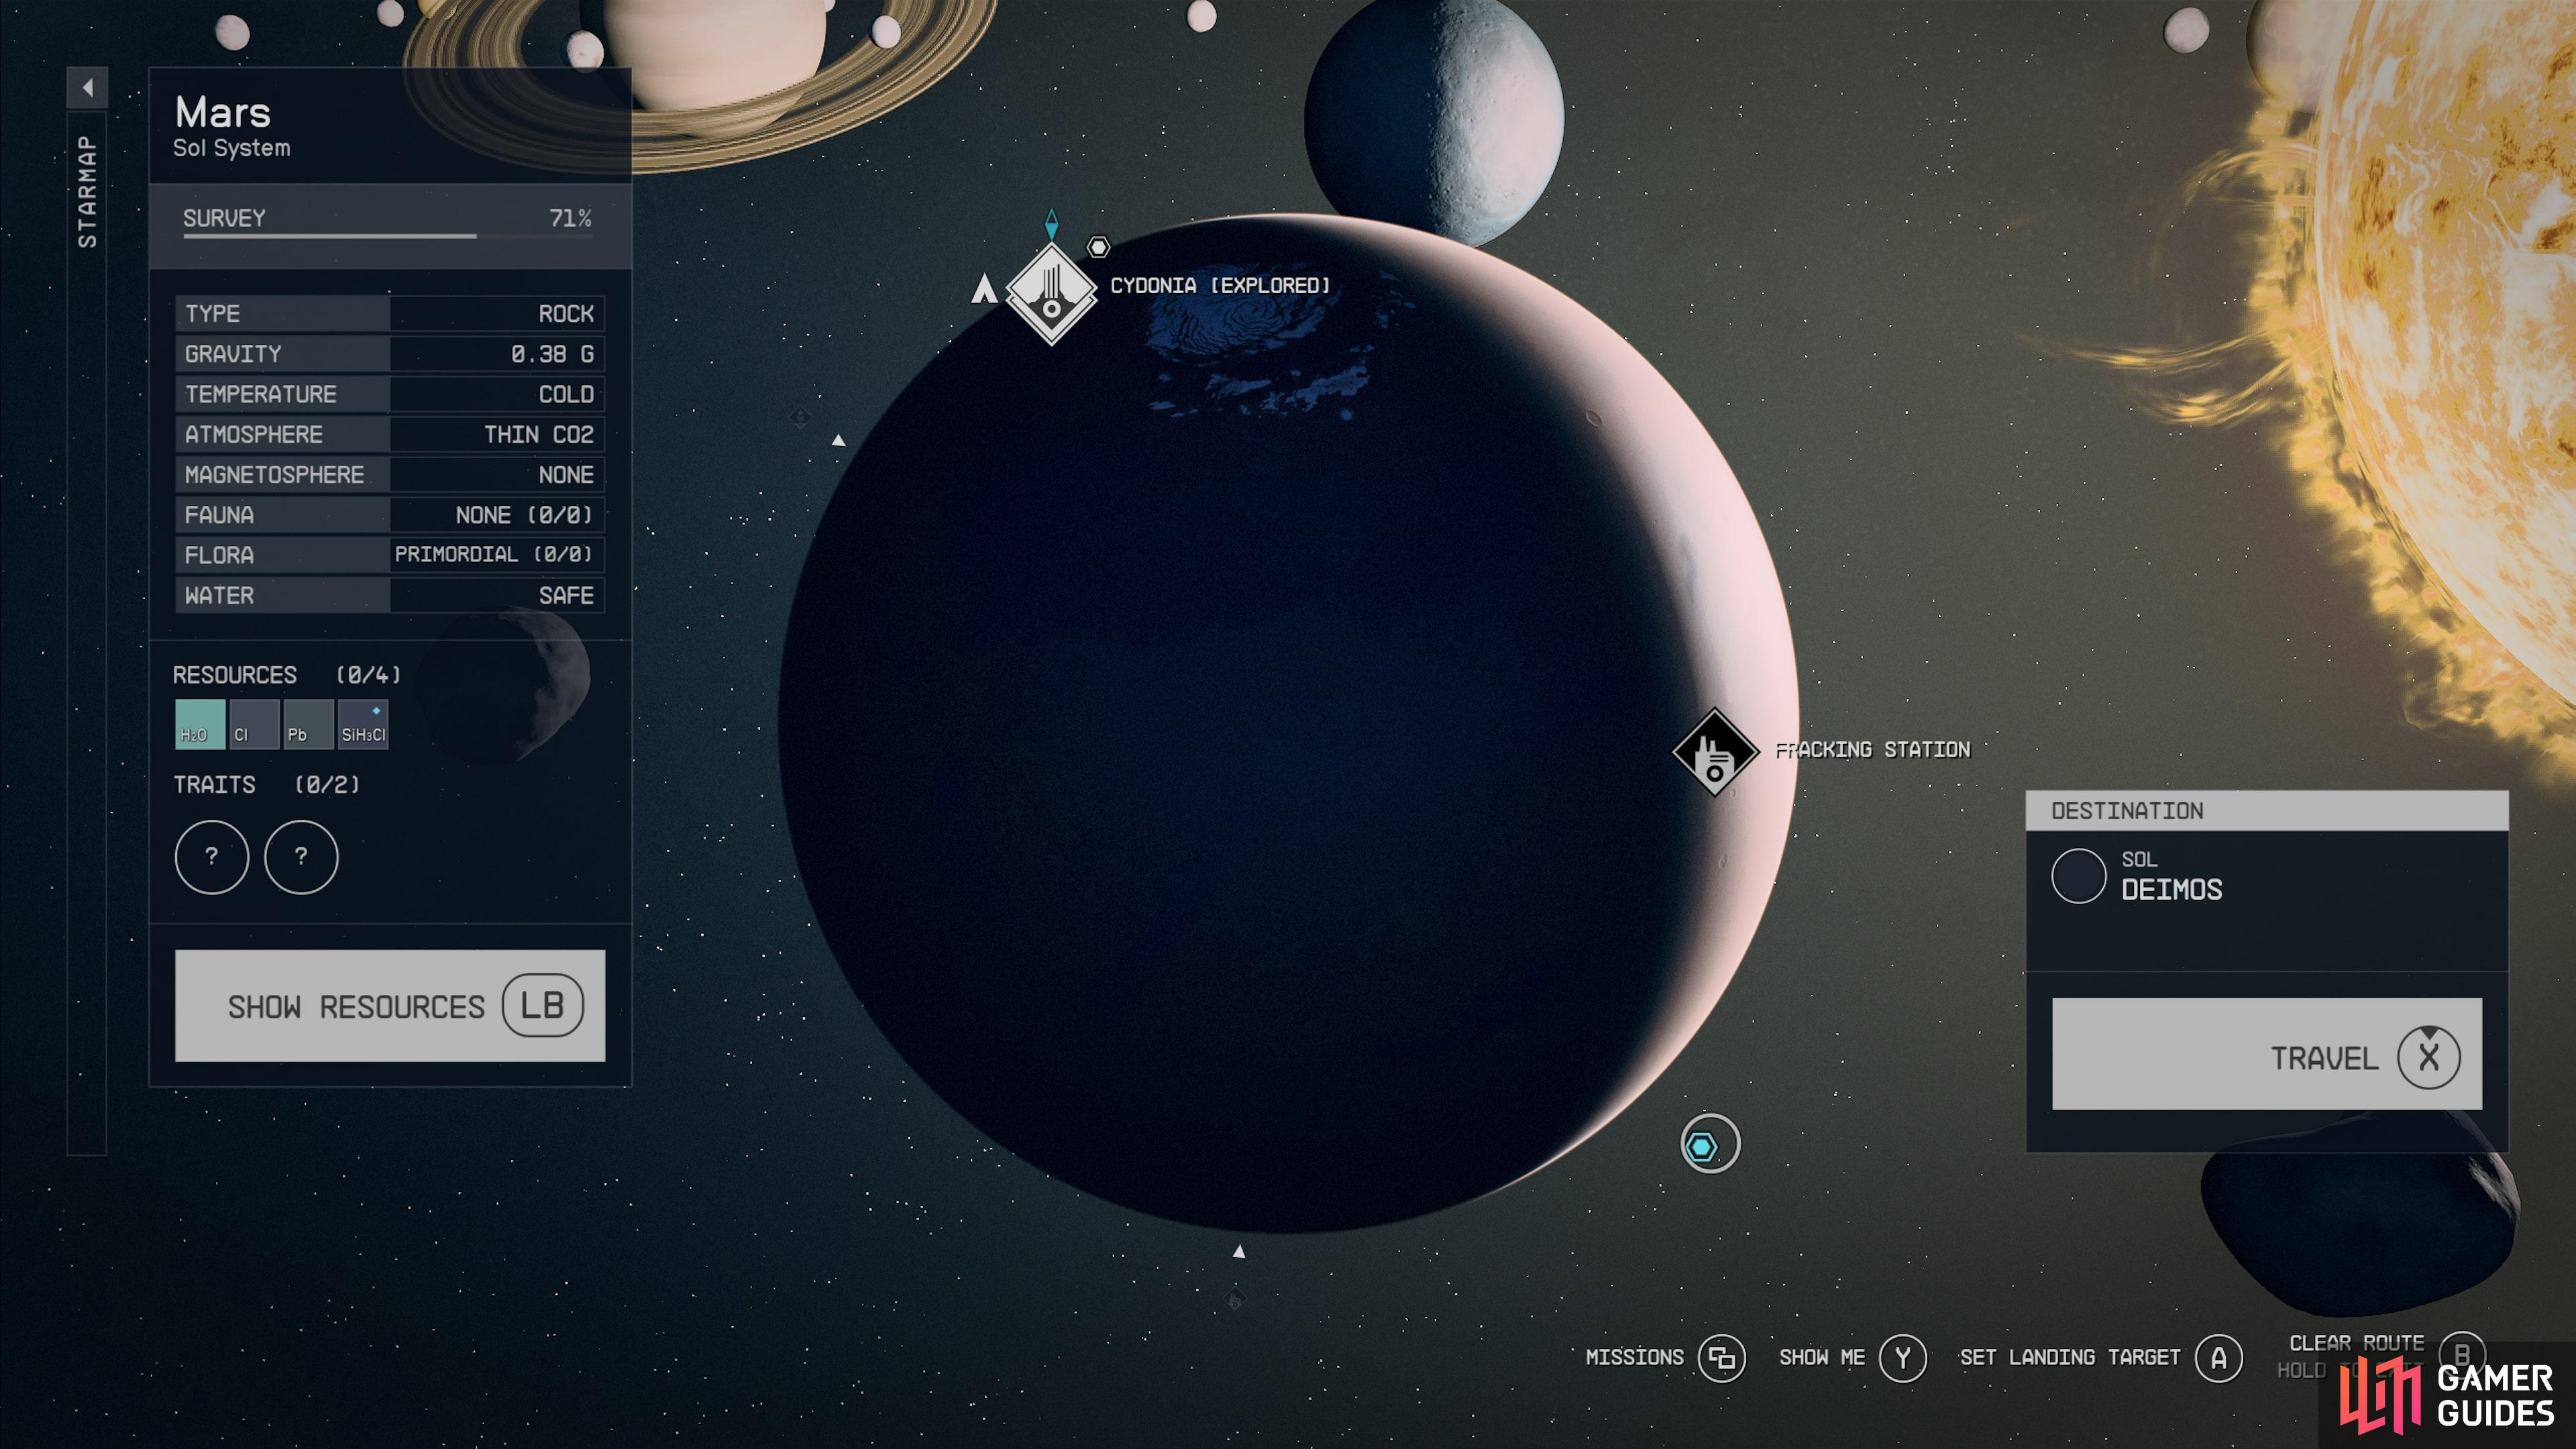 Deimos Staryard is also located in the Sol System.